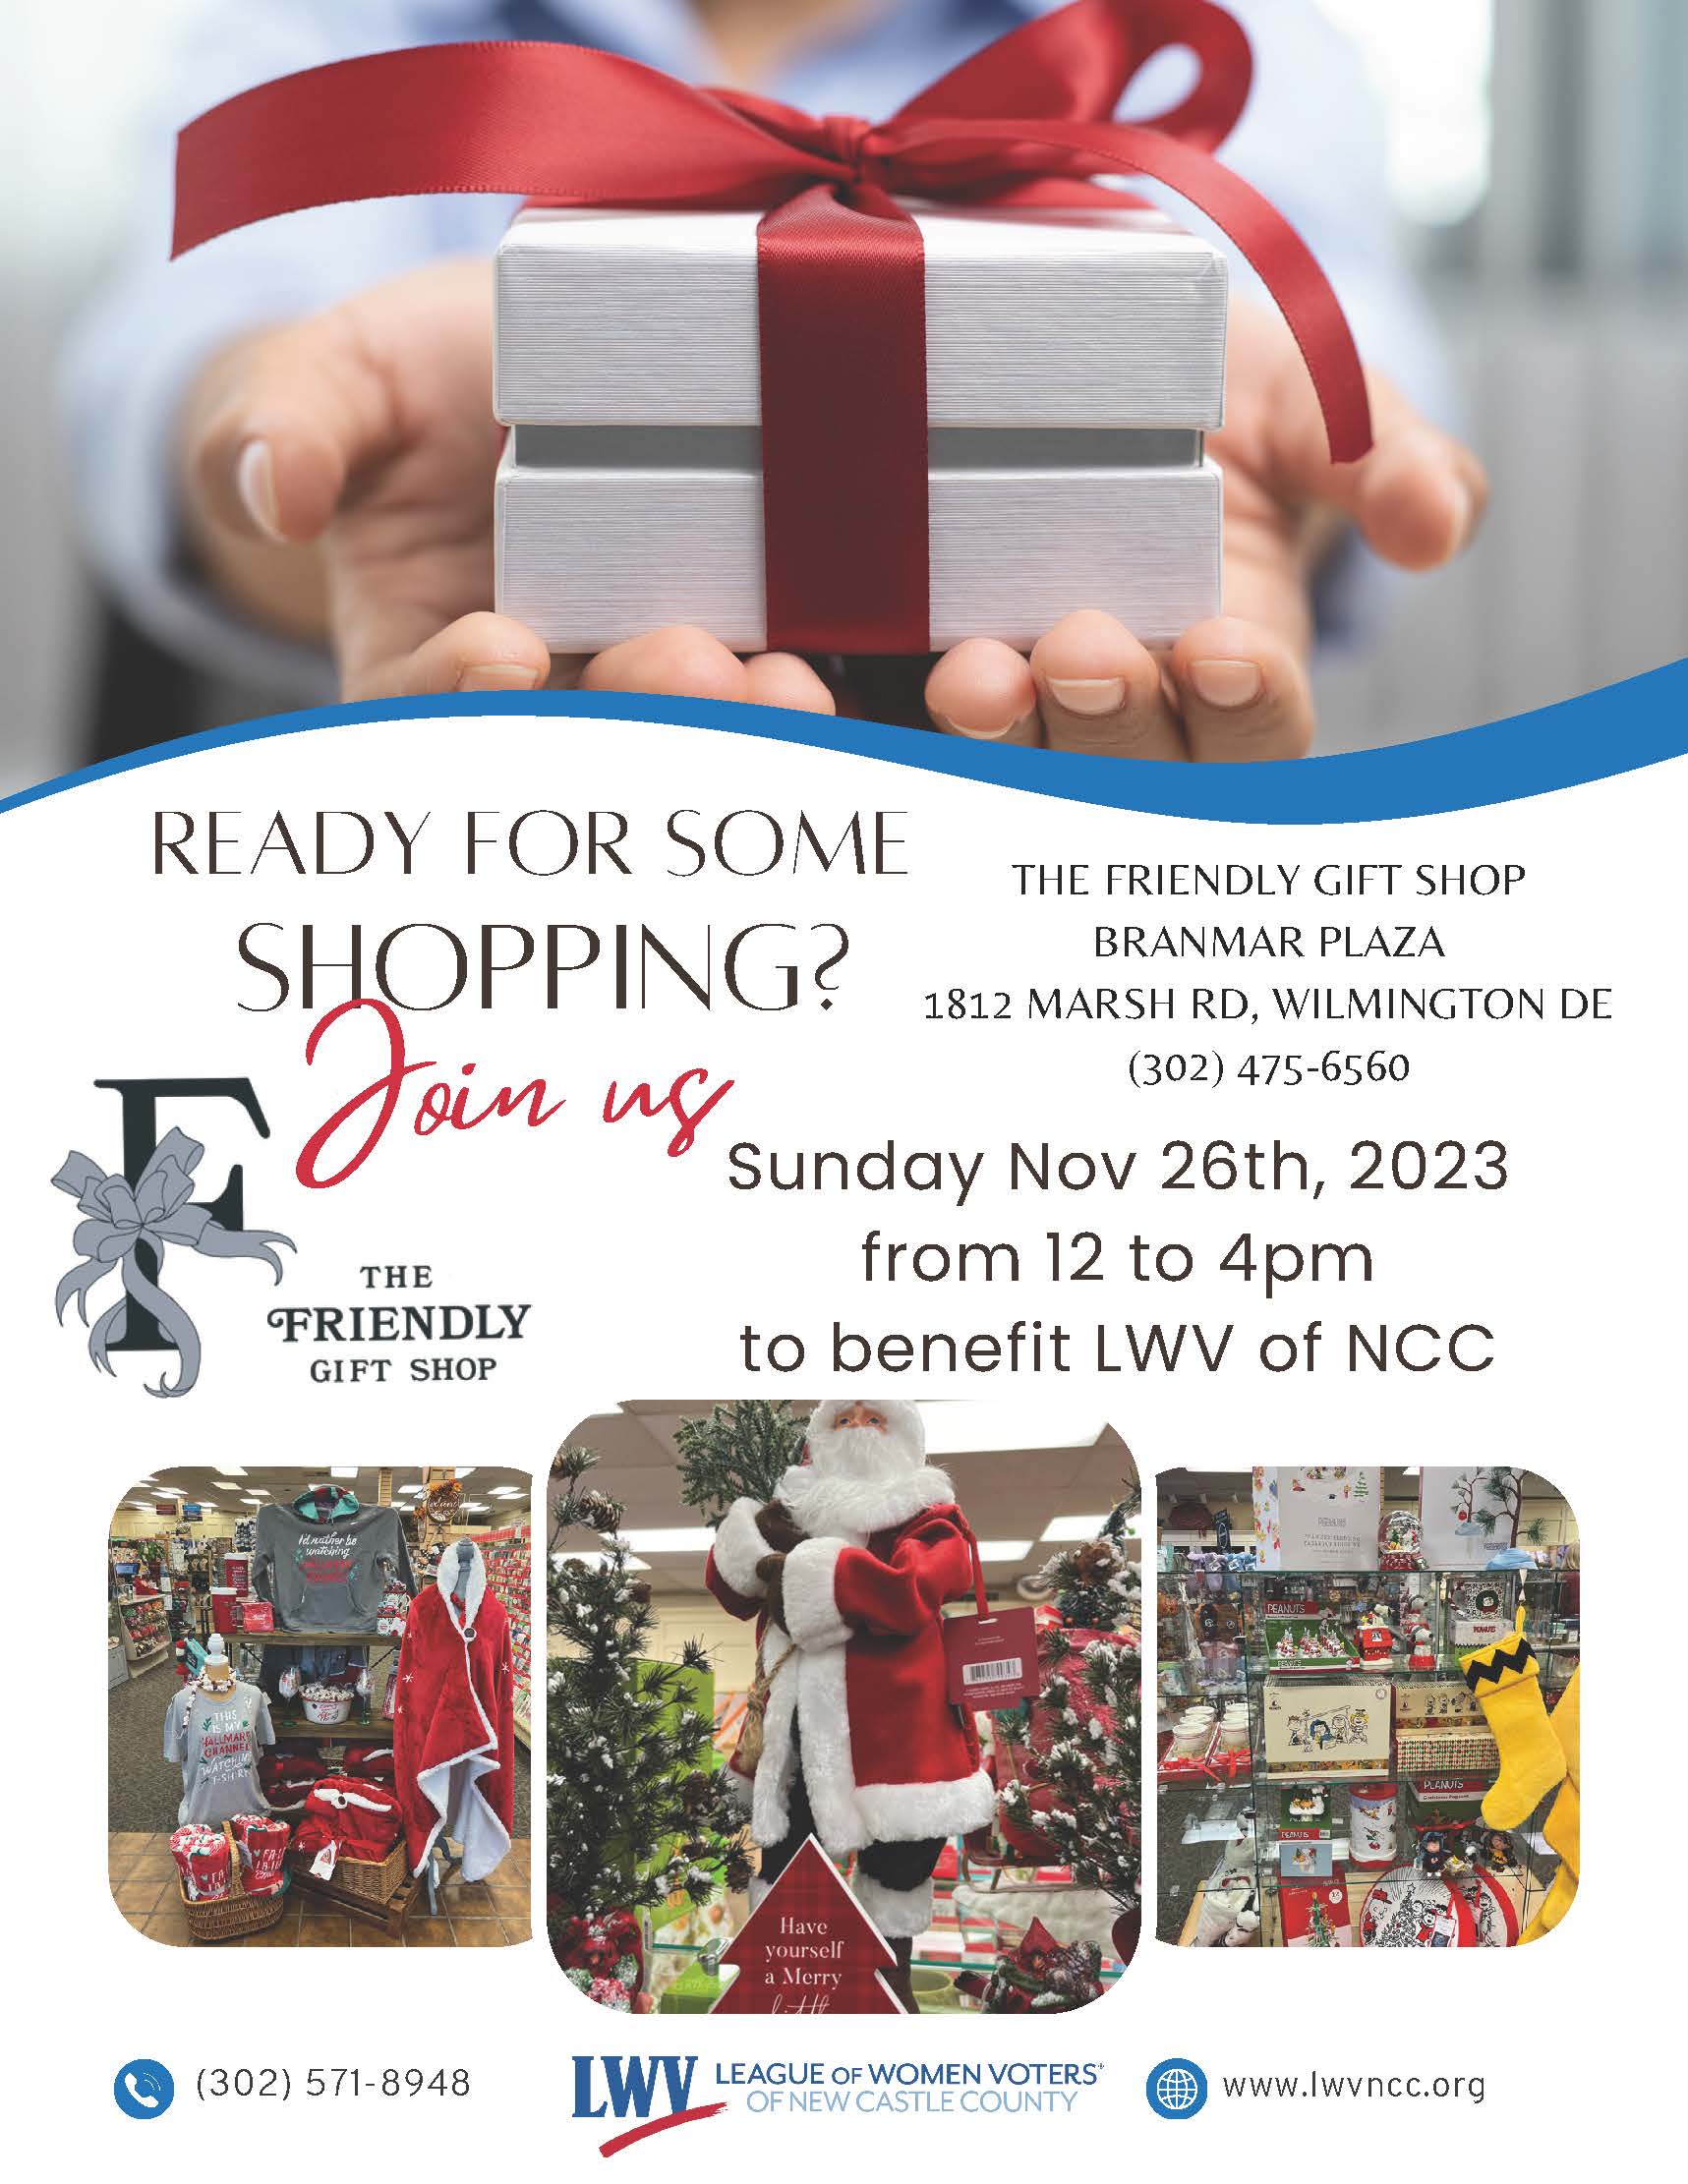 Ready for some shopping? The Friendly Gift Shop, Sunday Nov 26th 2023 from 12 to 4pm, to benefit LWV of NCC